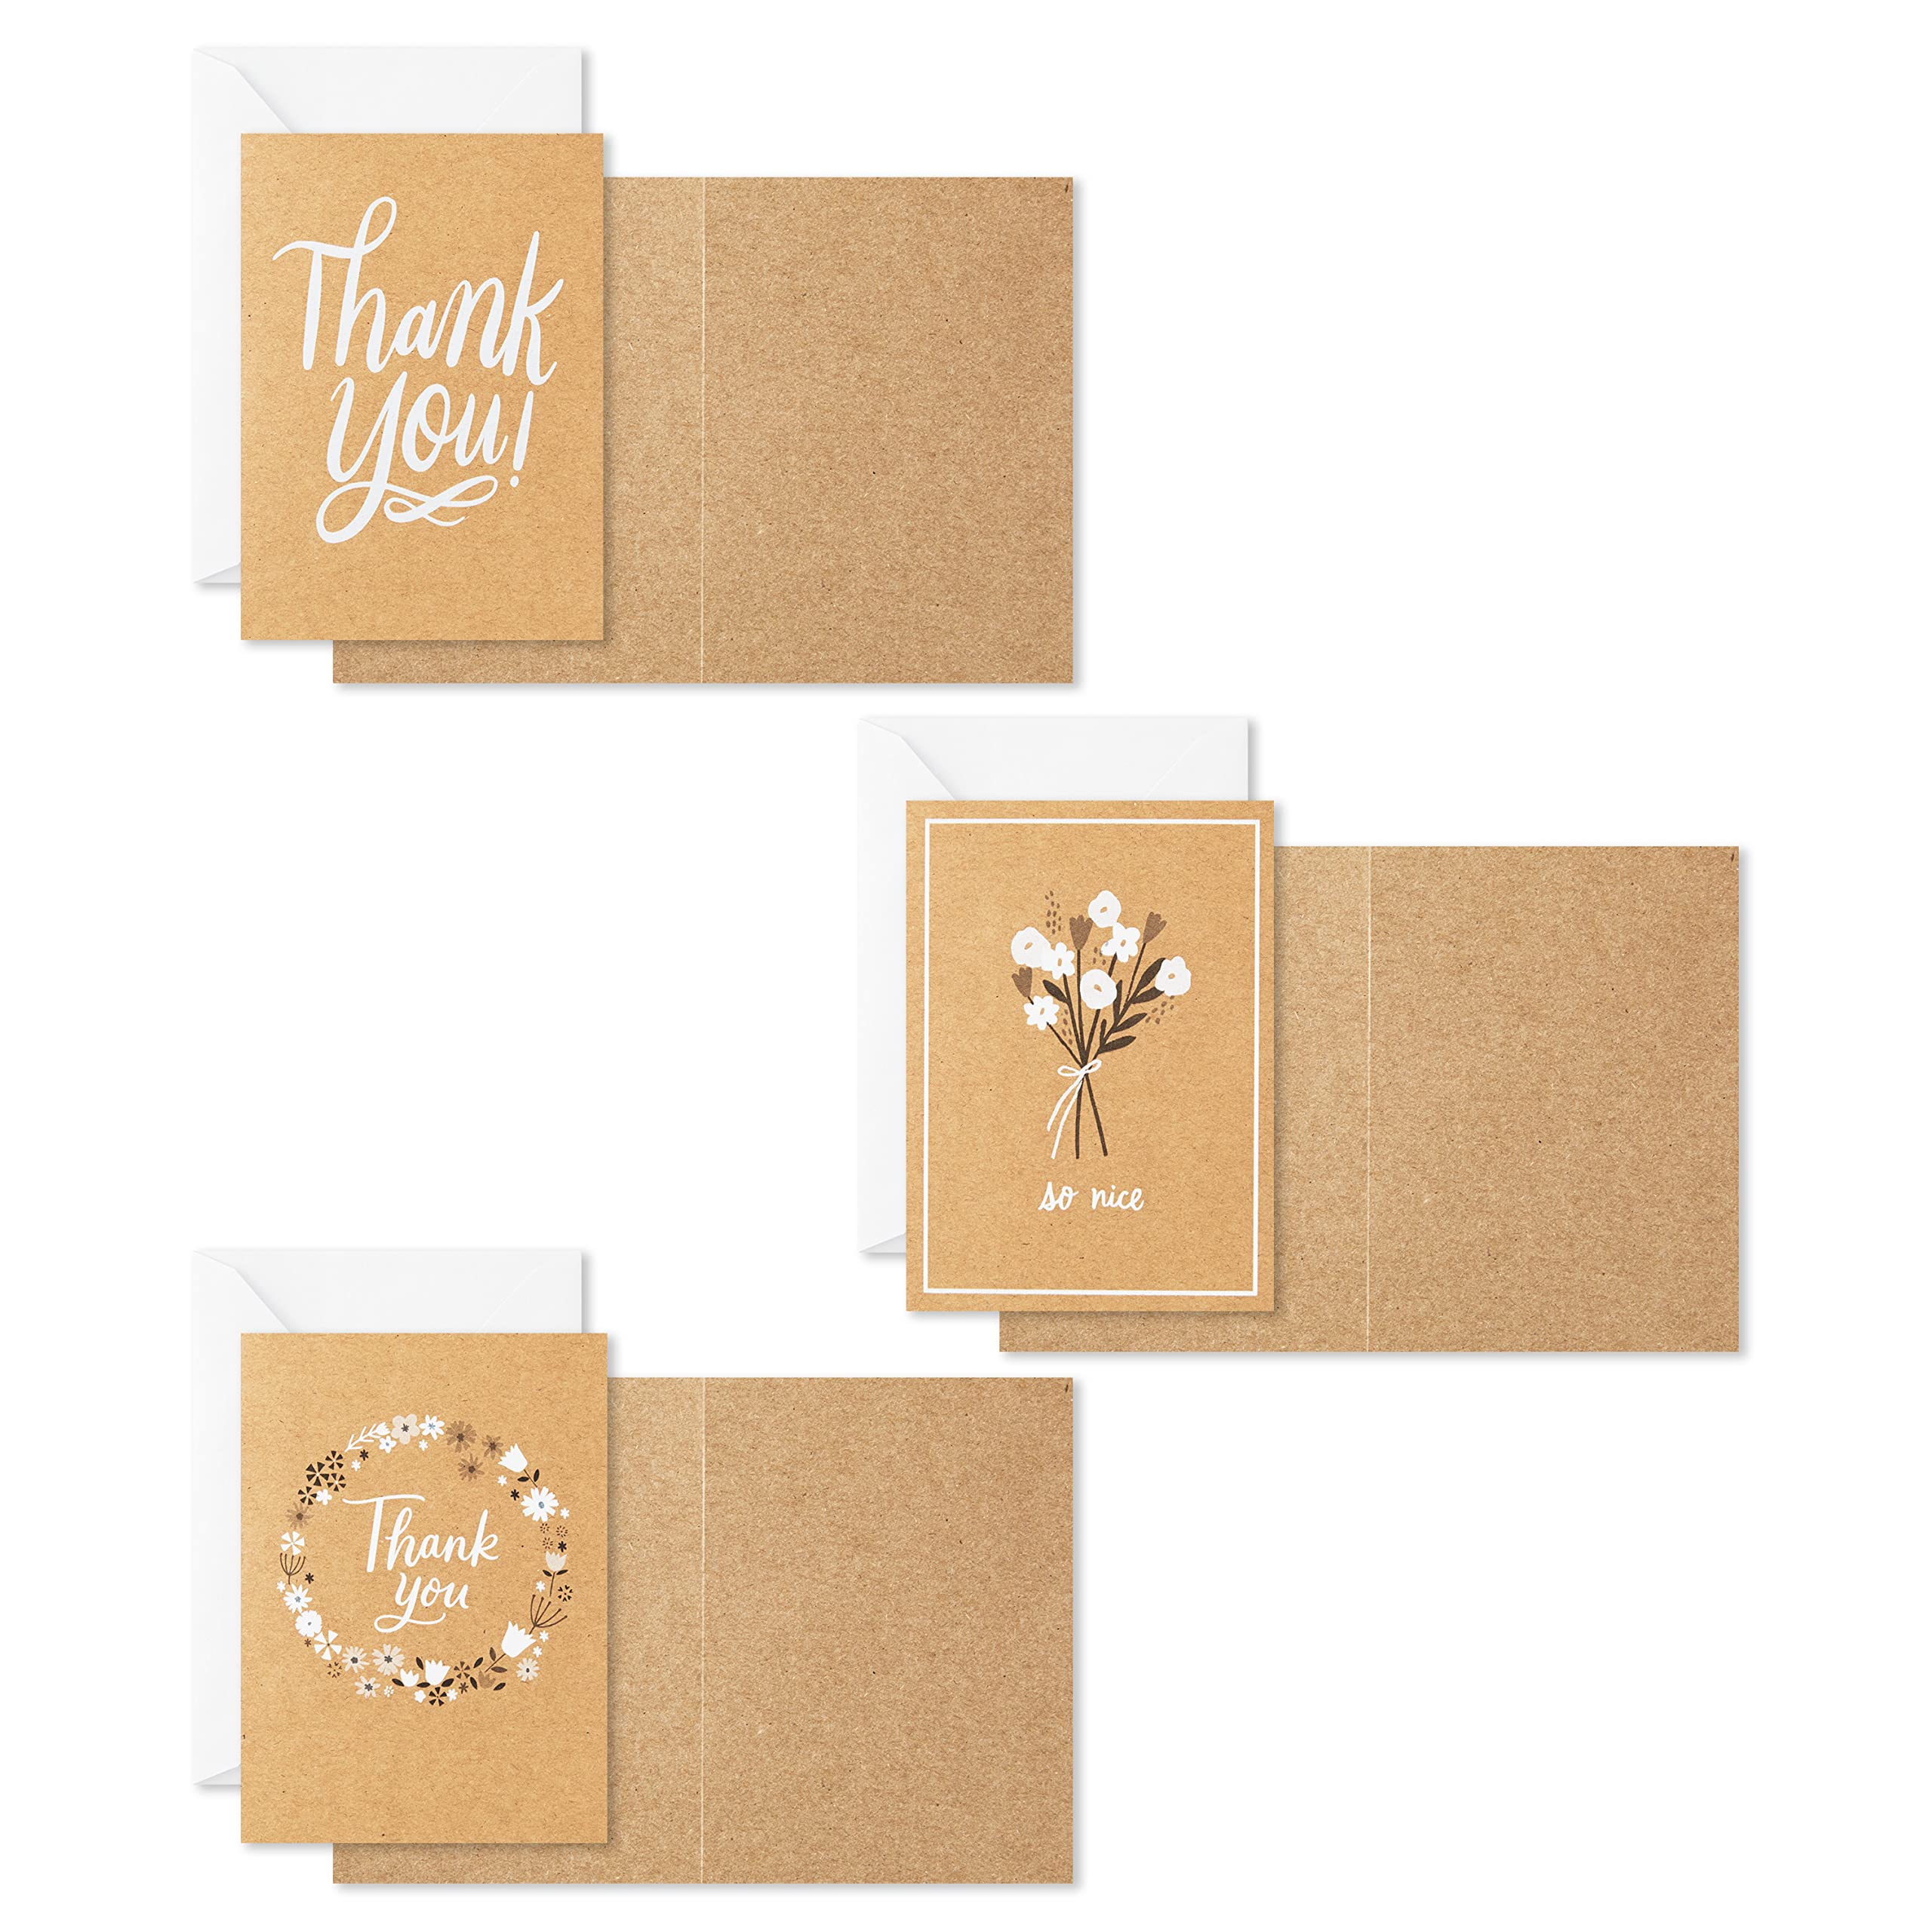 Hallmark Thank You Cards Assortment, Rustic Kraft (48 Thank You Notes with Envelopes)